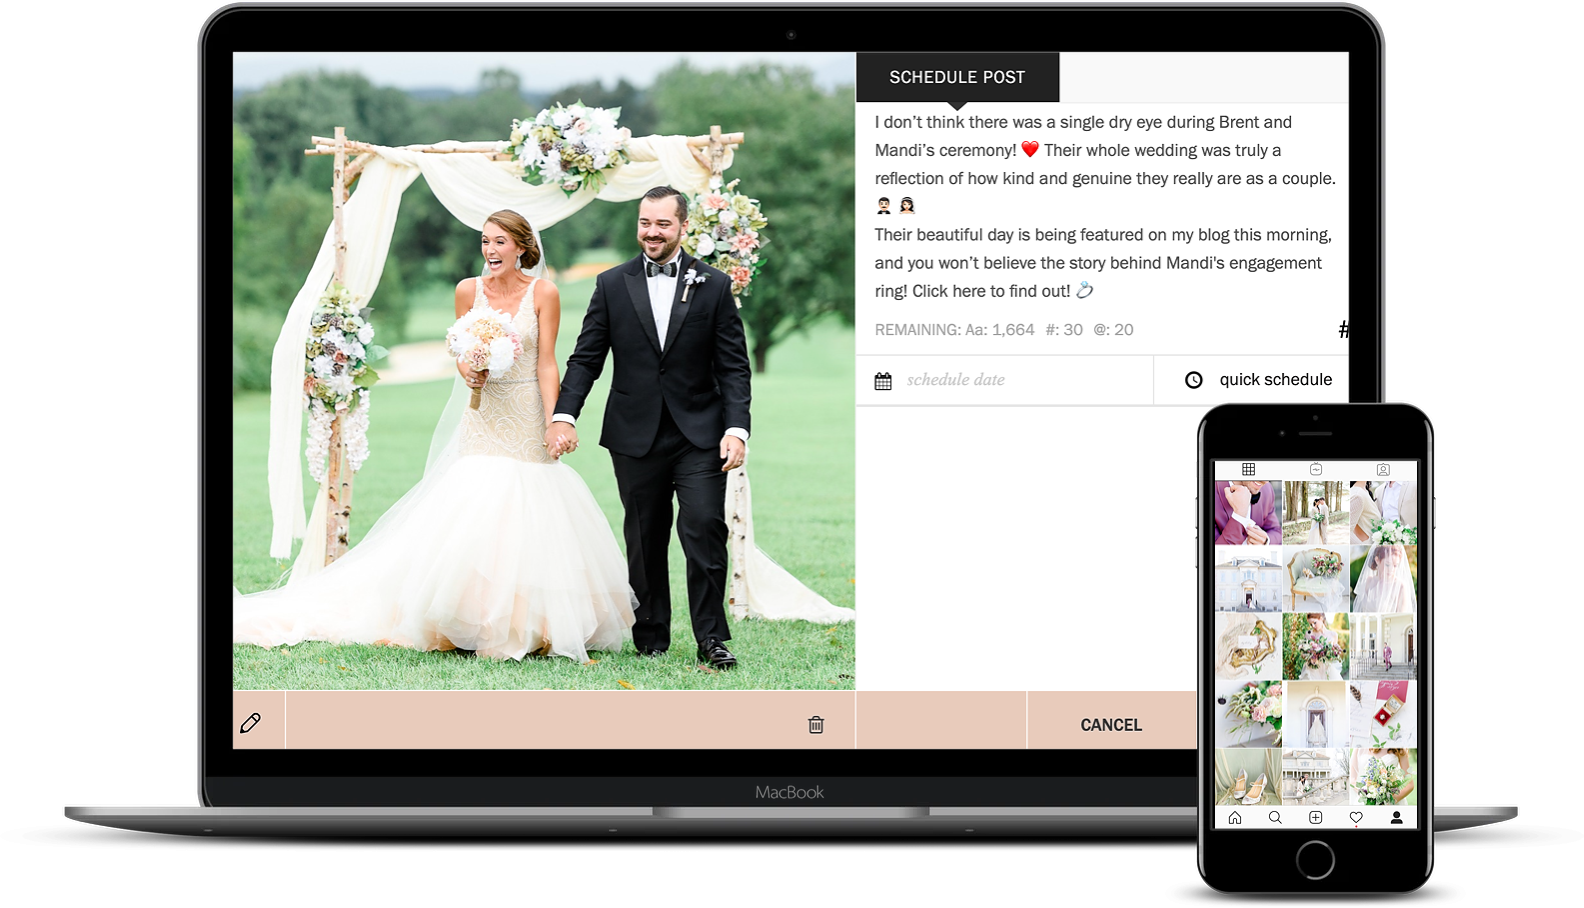 Instagram Captions for Wedding Photographers Already Done for You